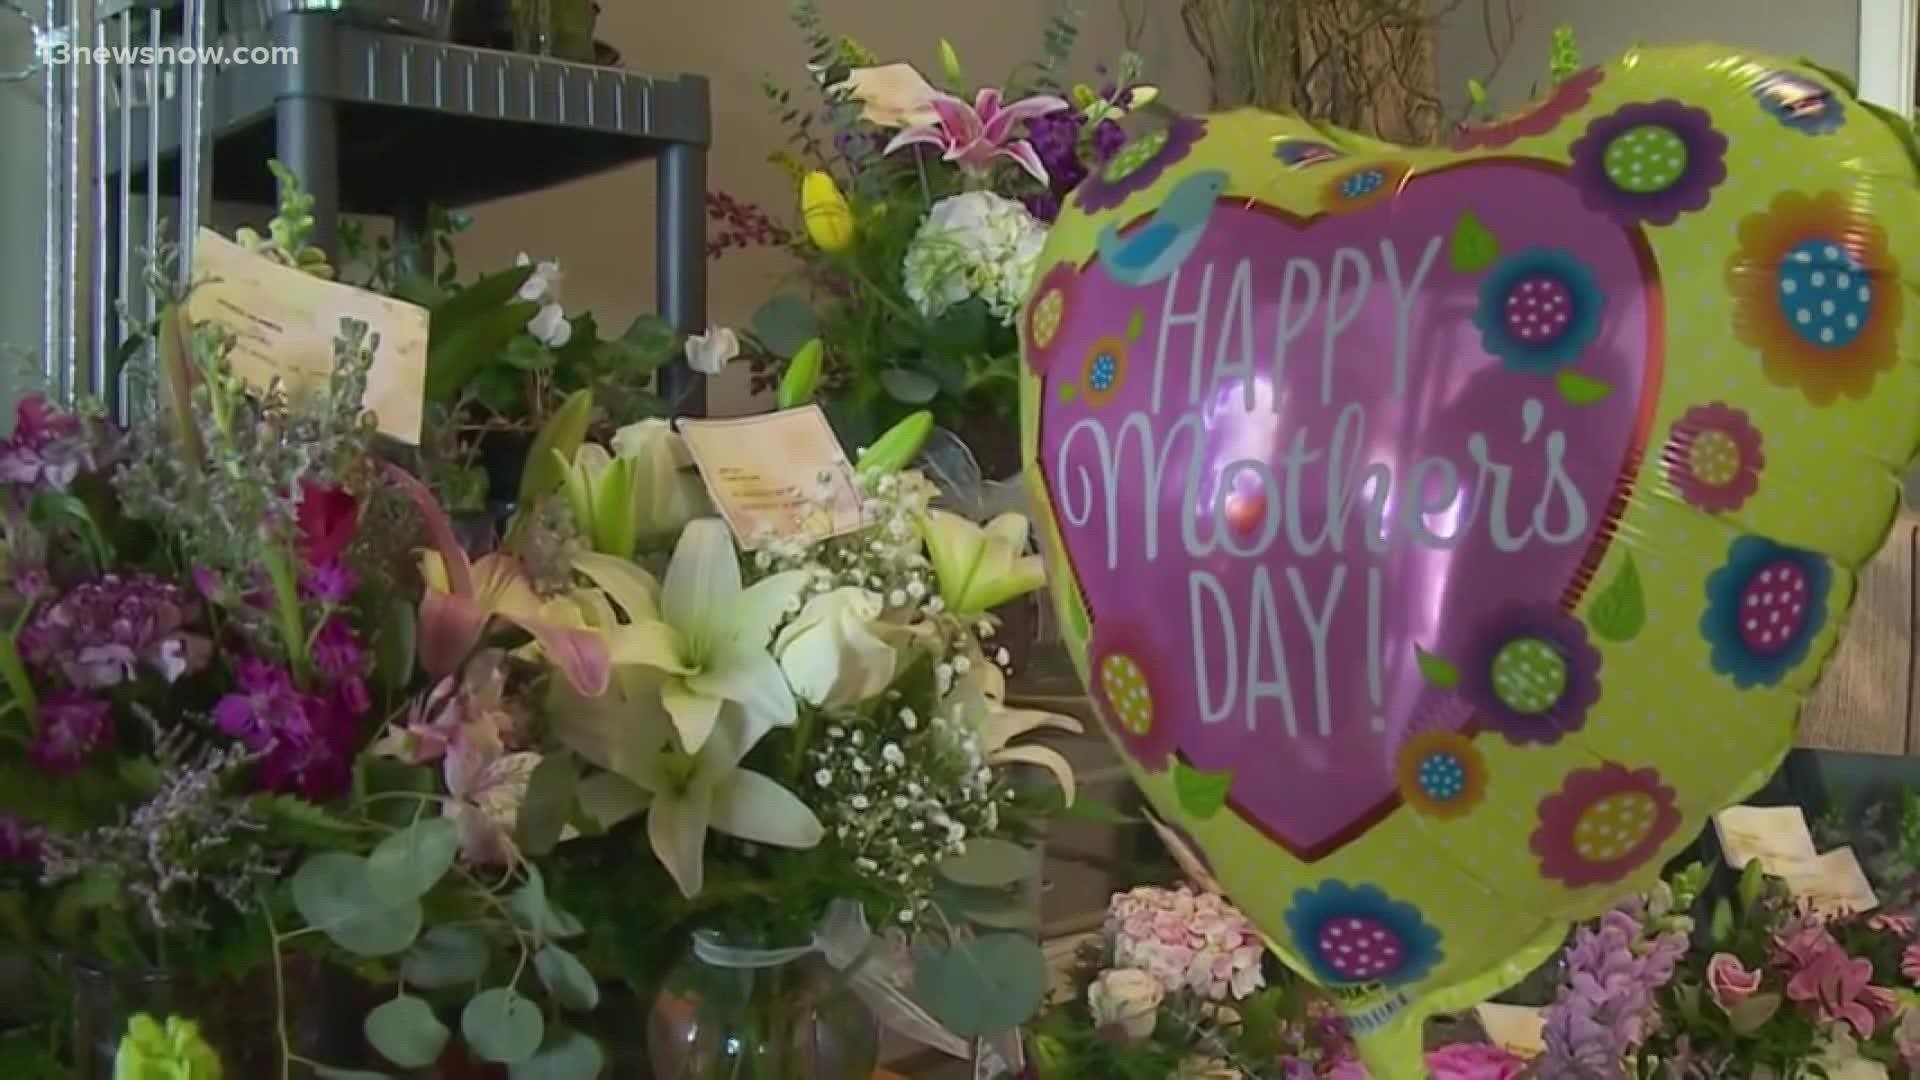 An event for single or alone moms and a local florist's efforts help make the day great.